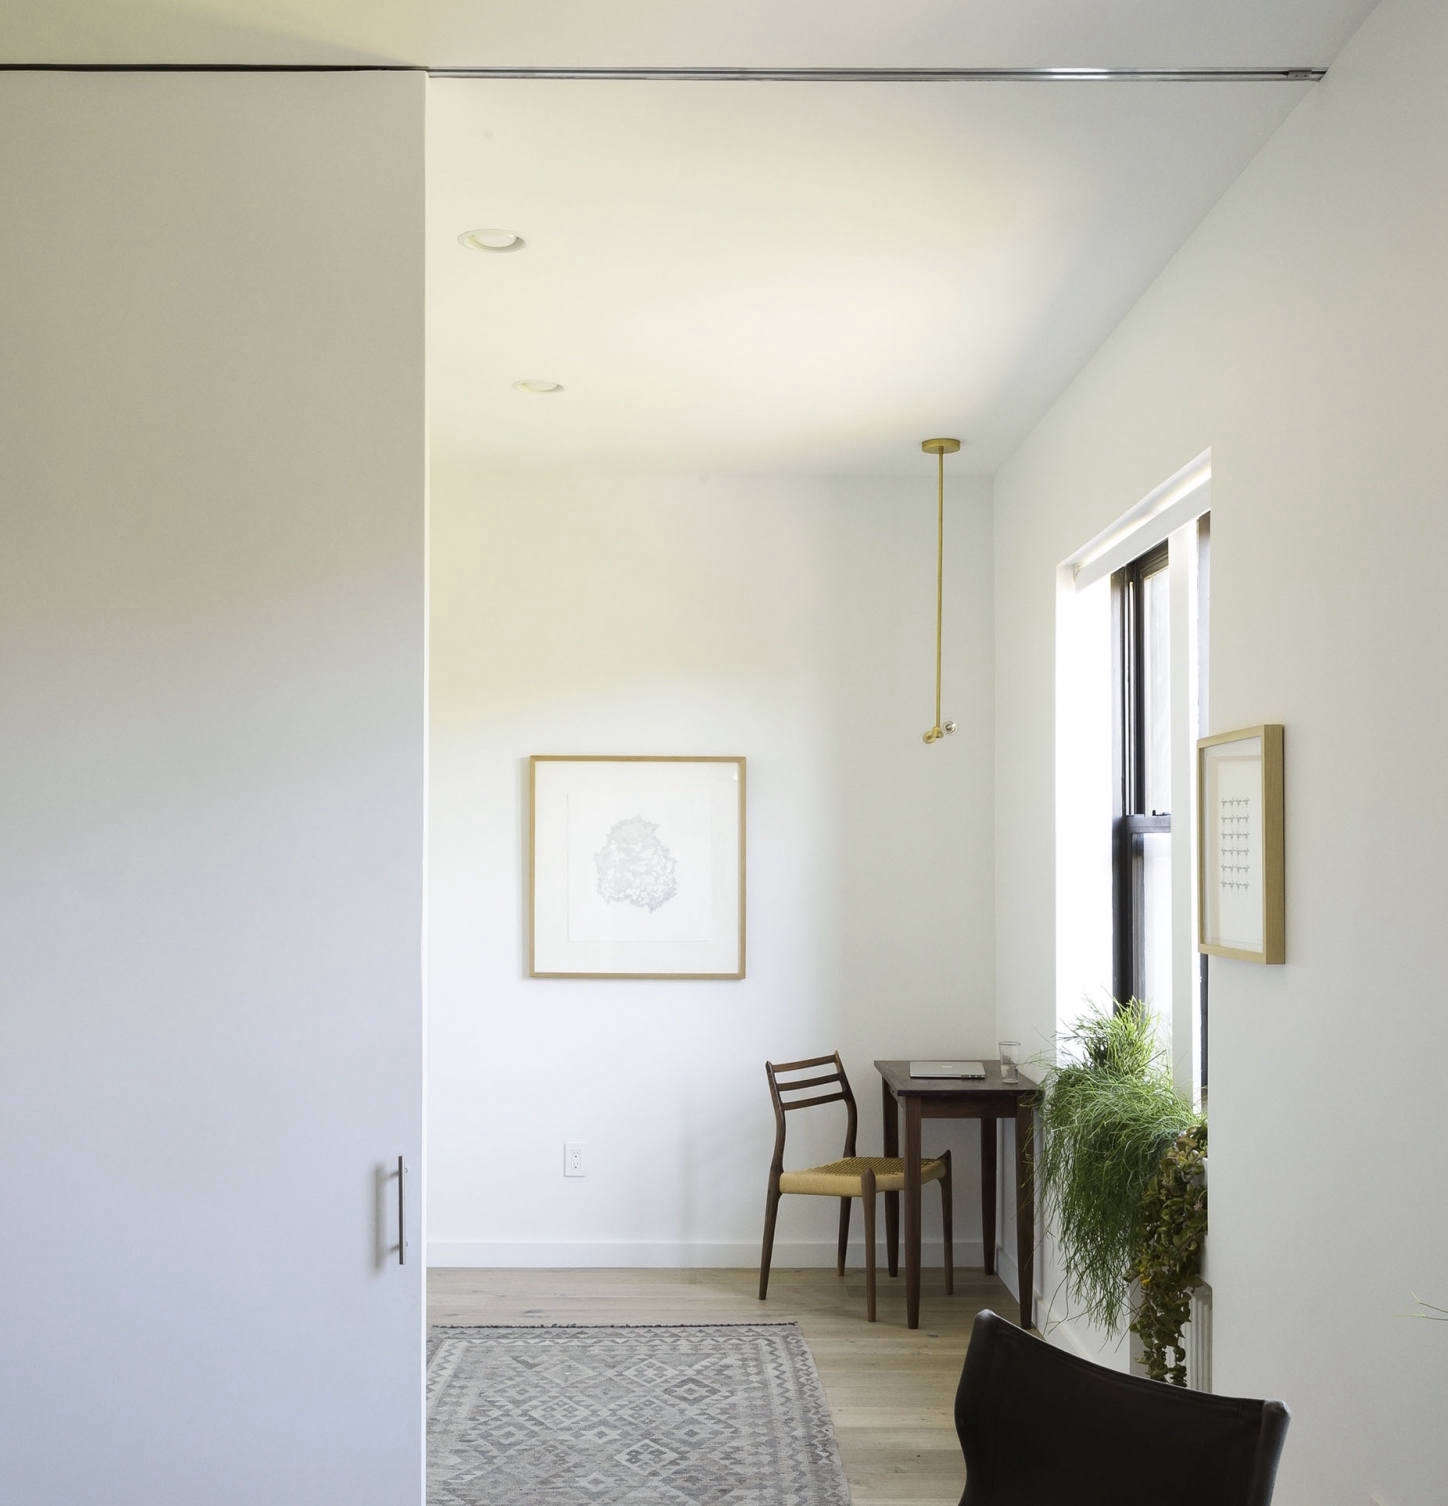 Recessed Lighting, When To Use Recessed Lighting